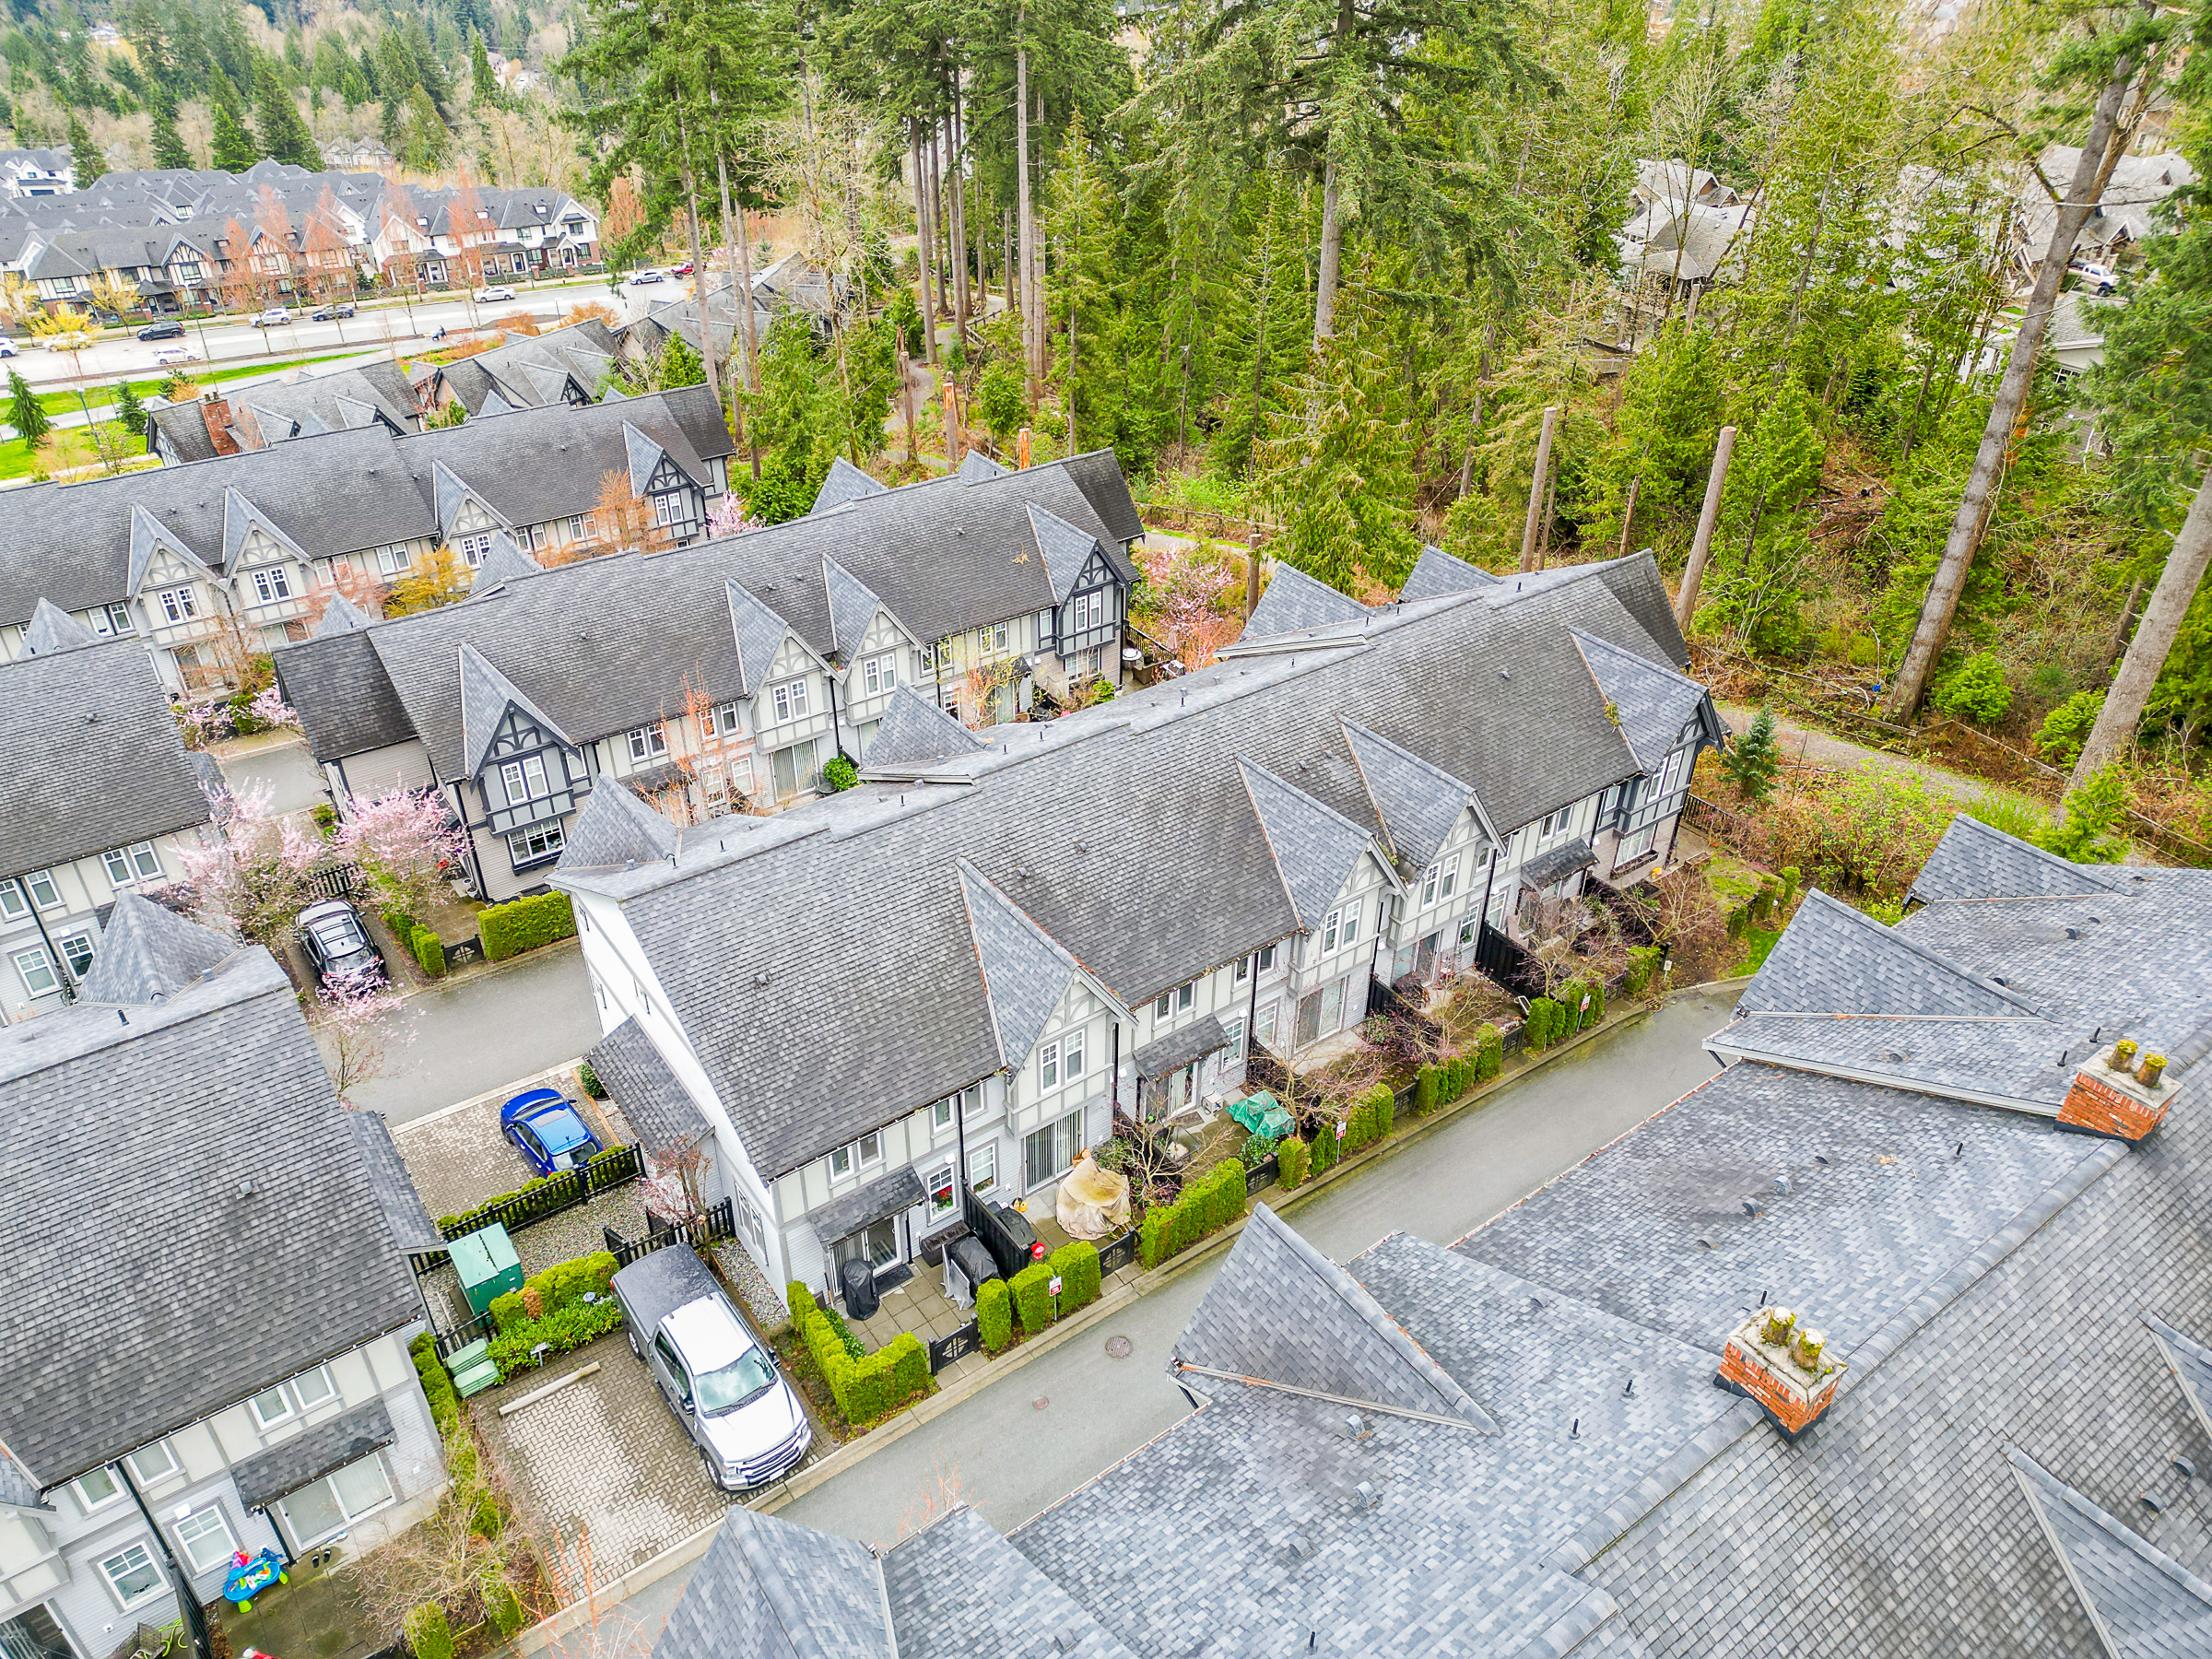 Krista Lapp Burke Mountain Real Estate Unit 48 1320 Riley by Mosaic Street Coquitlam Drone